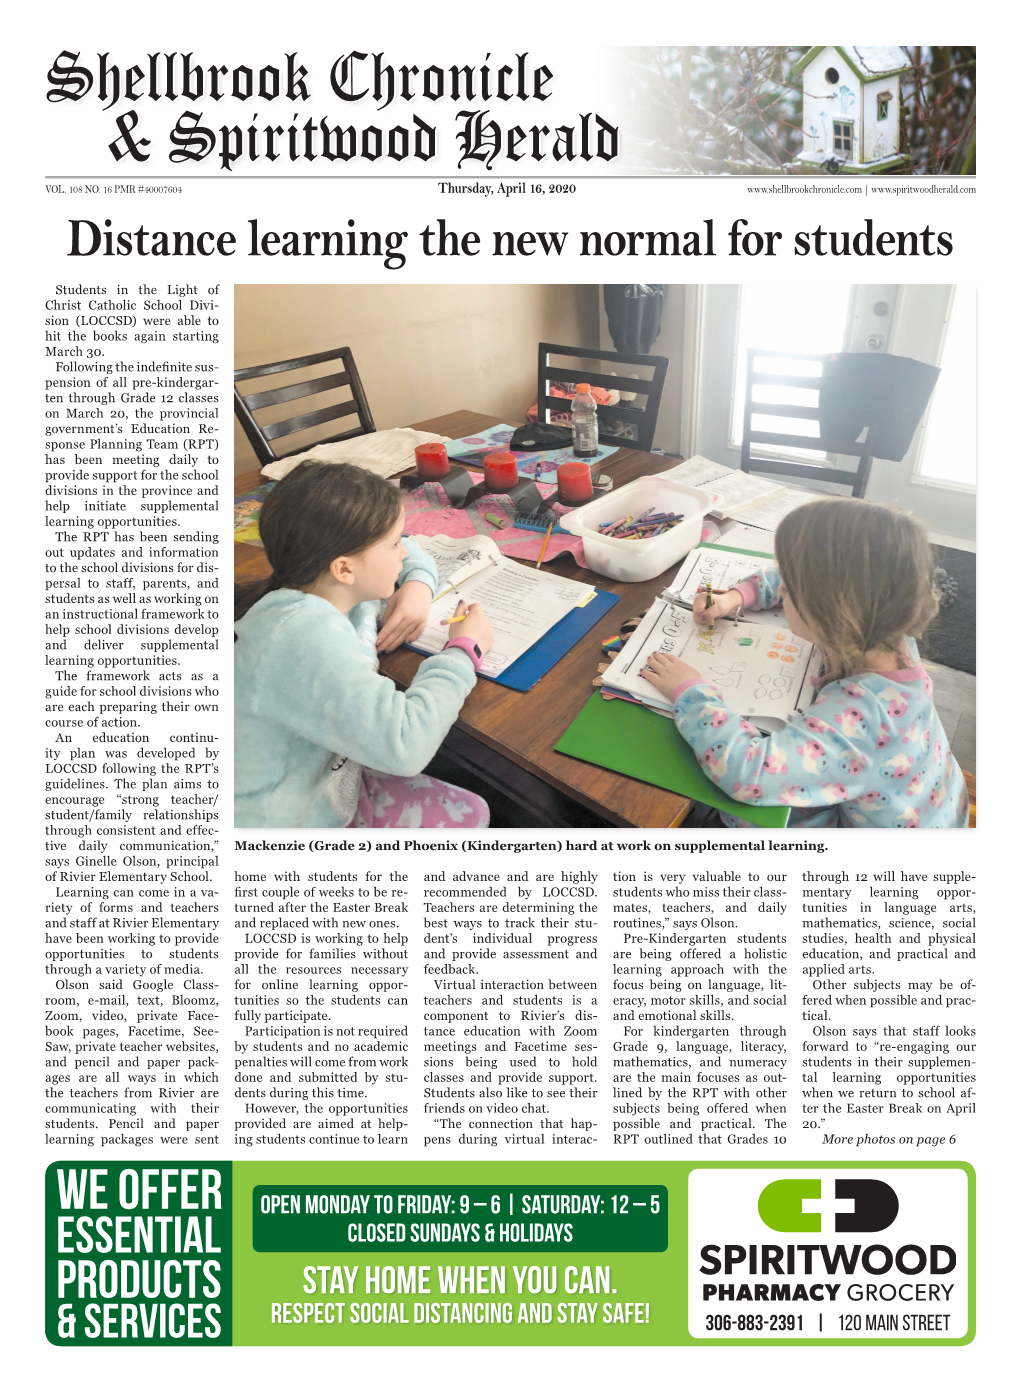 Distance Learning the New Normal for Students